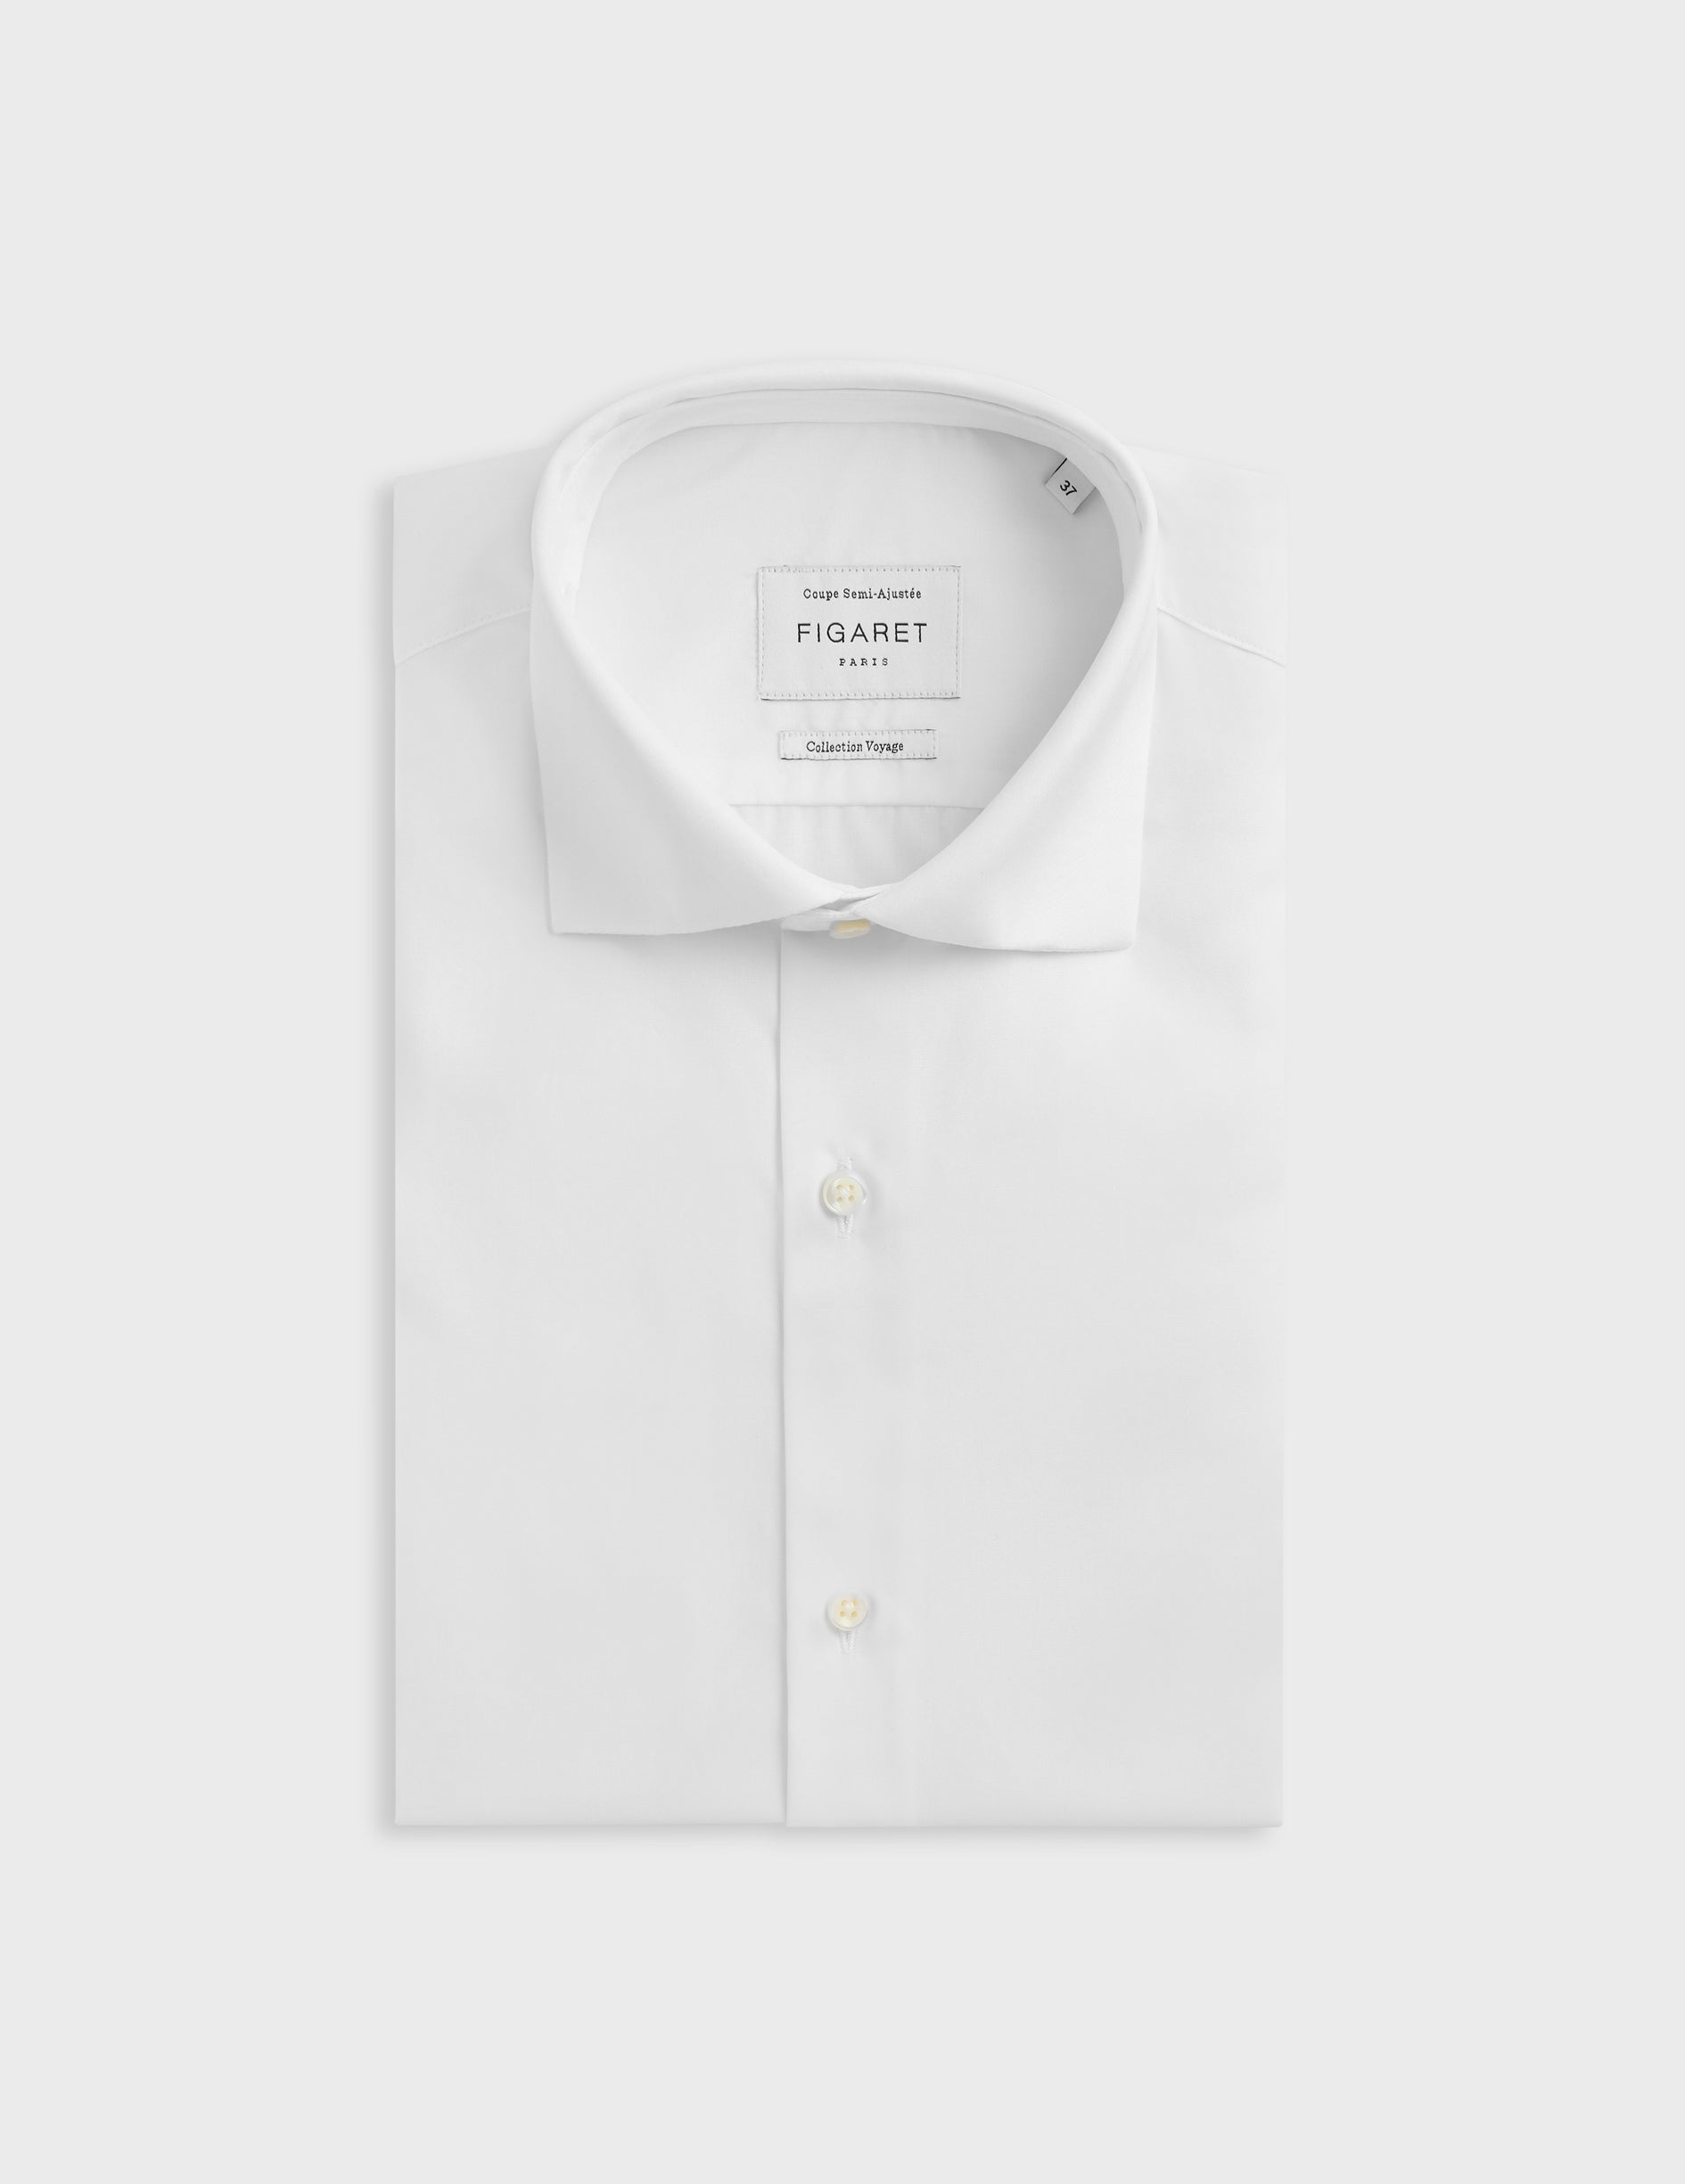 Semi-fitted white wrinkle-free shirt